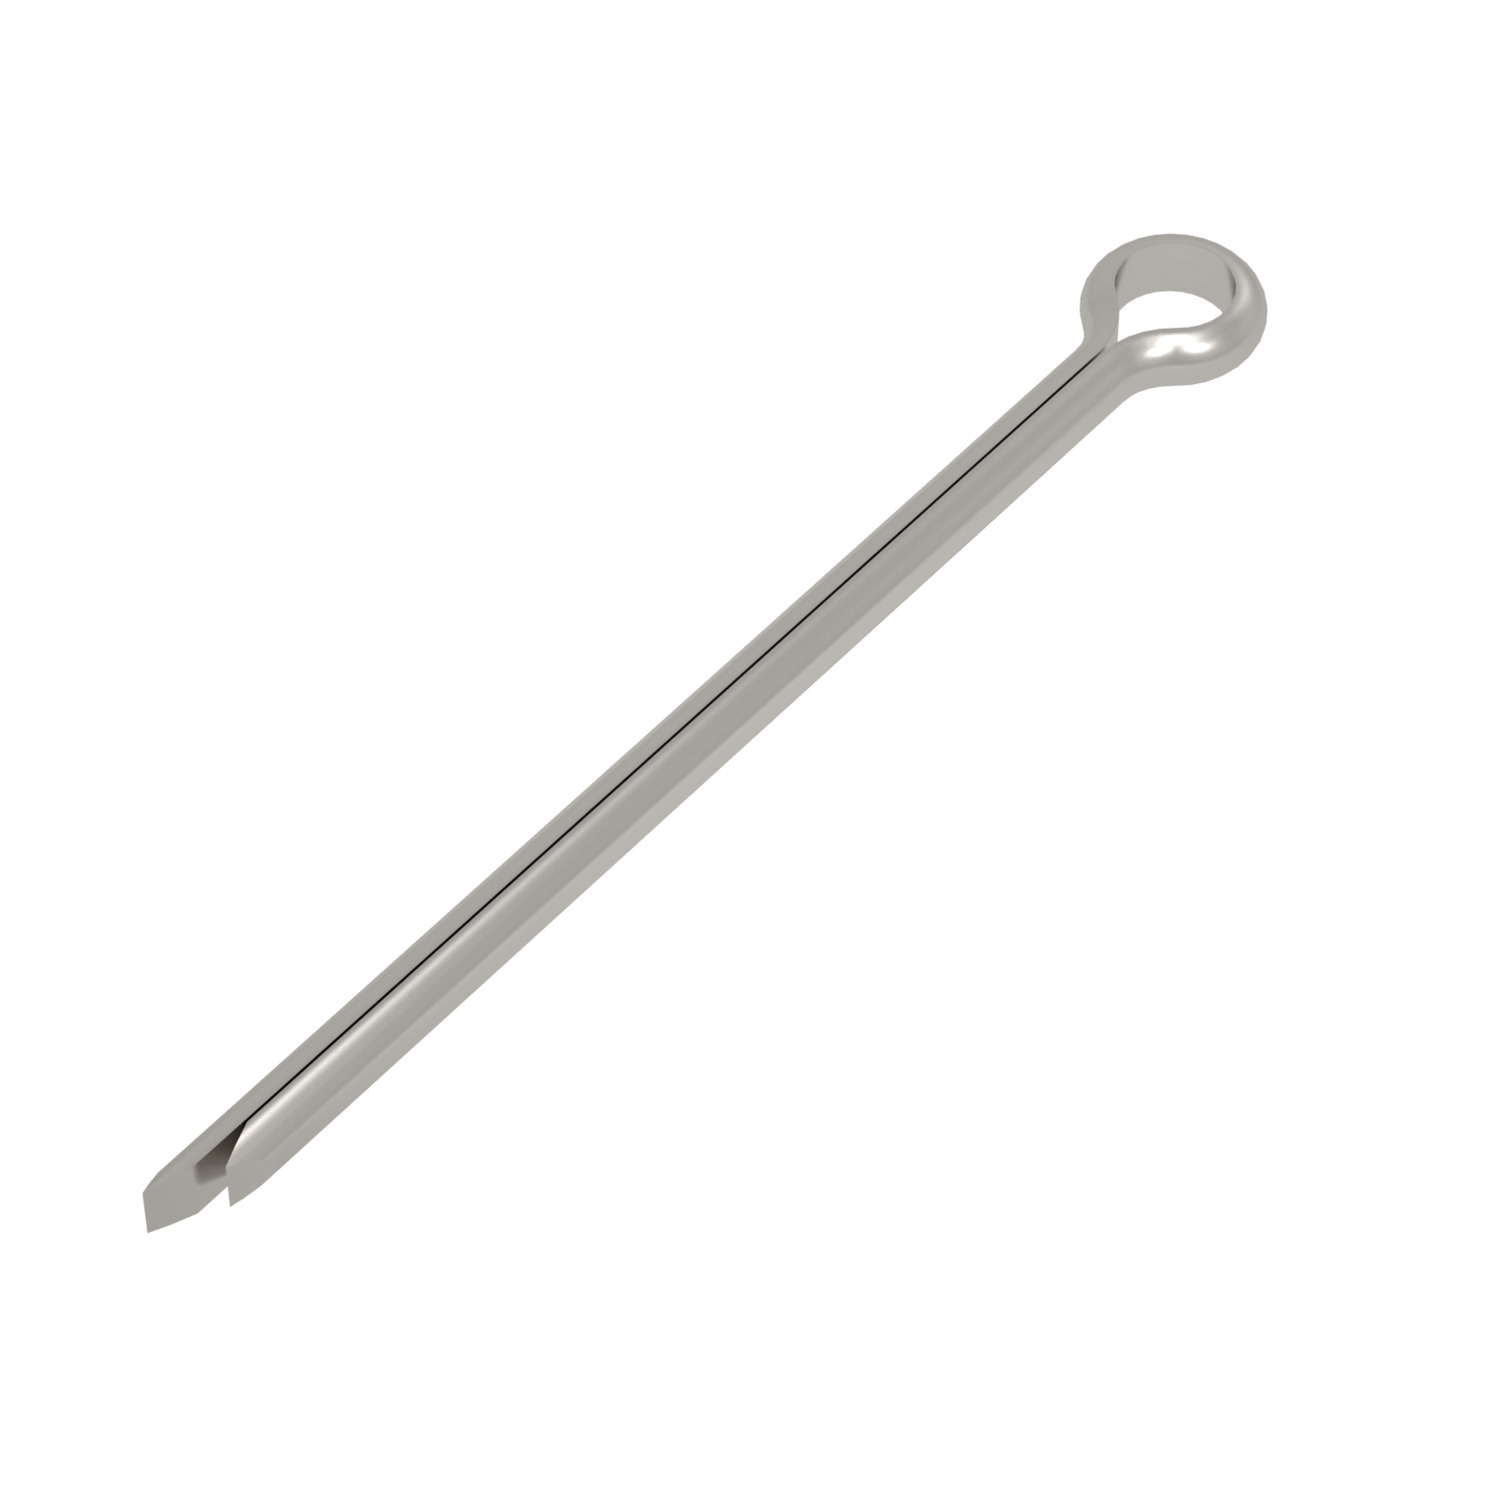 Product 65675, Stainless Cotter Pins  / 